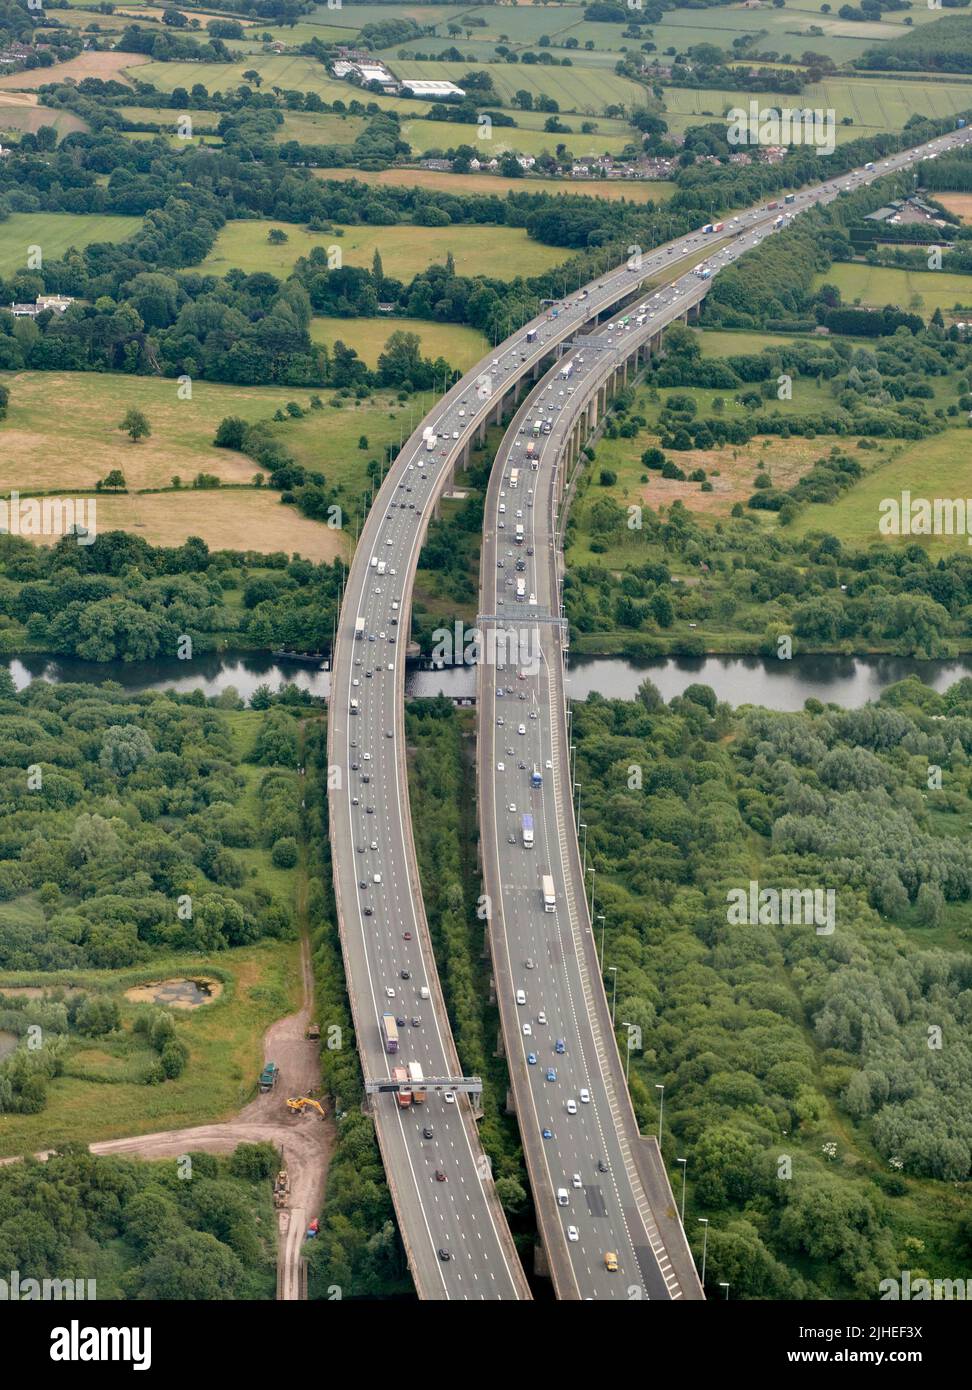 An aerial photograph of Thelwell Viaduct, taking the M6 motorway over the Manchester Ship Canal, near Warrington, Cheshire, north west England, UK Stock Photo